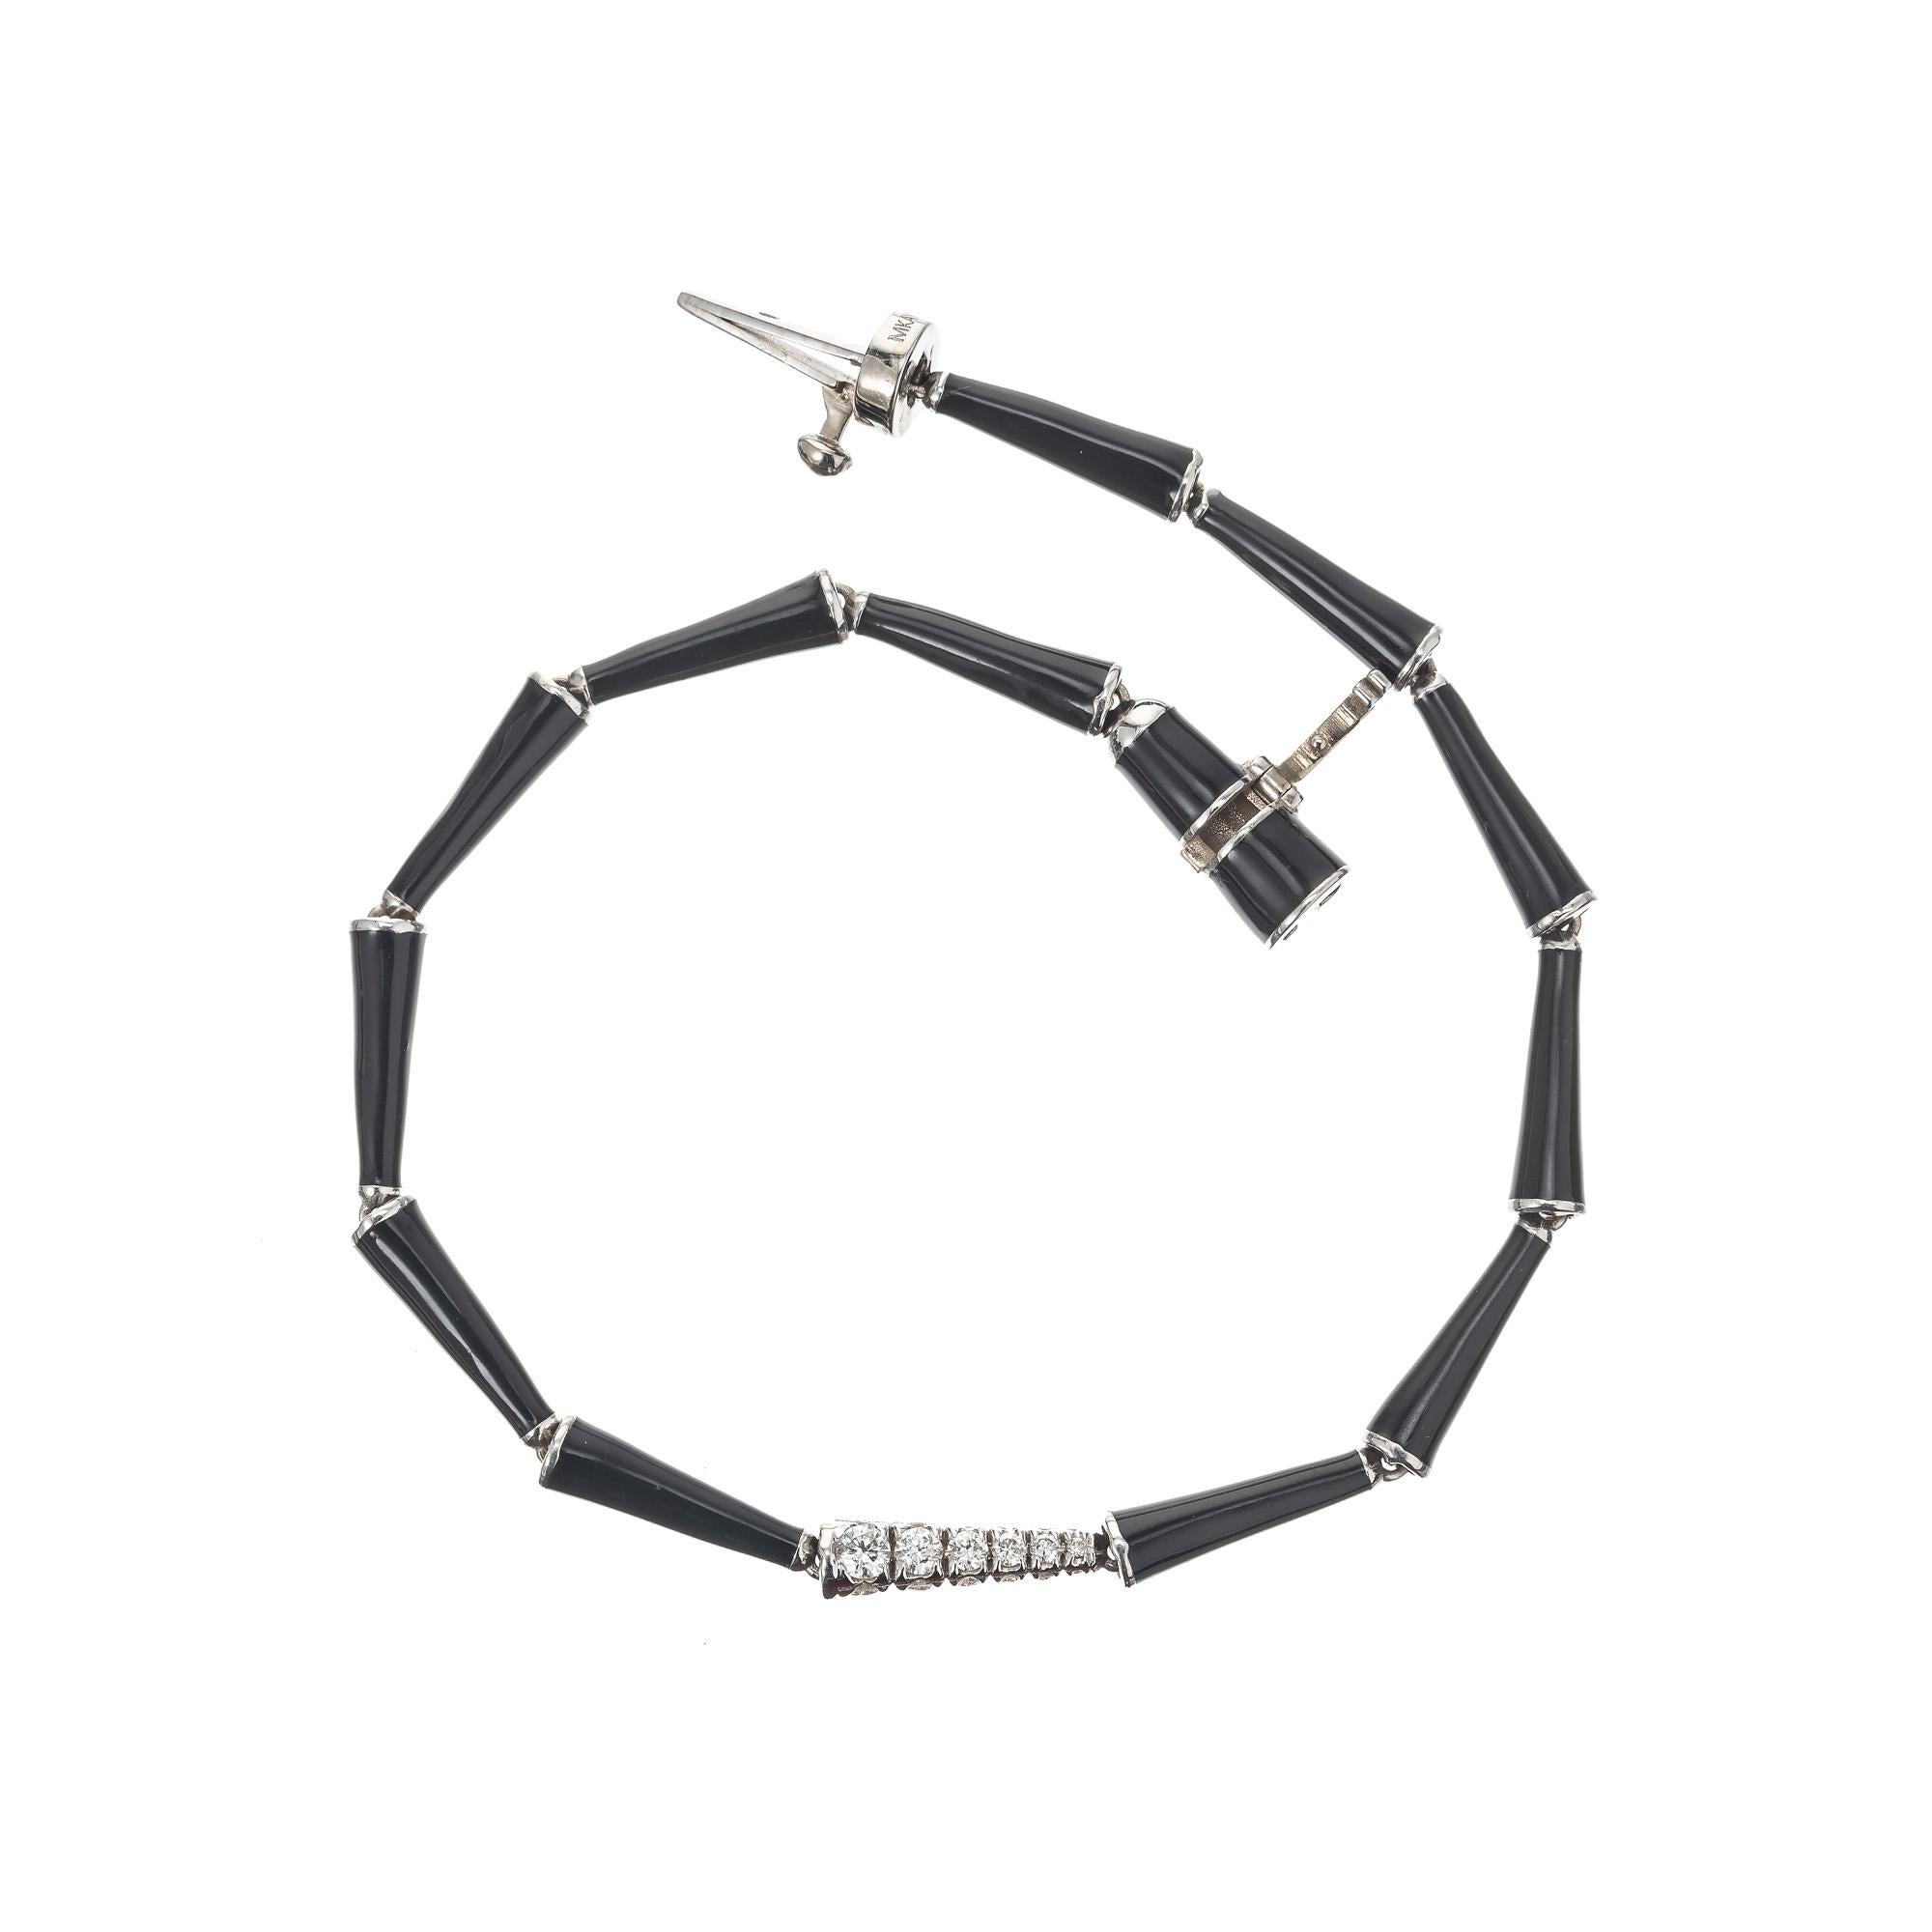 Melissa Kaye Lola diamond and enamel link bracelet. 18k white gold bracelet with 18 round diamonds and 13 black enamel cones measuring 6.75 inches. 
Follow us on our 1stdibs storefront to view our weekly new additions and 5 Star Reviews at Peter